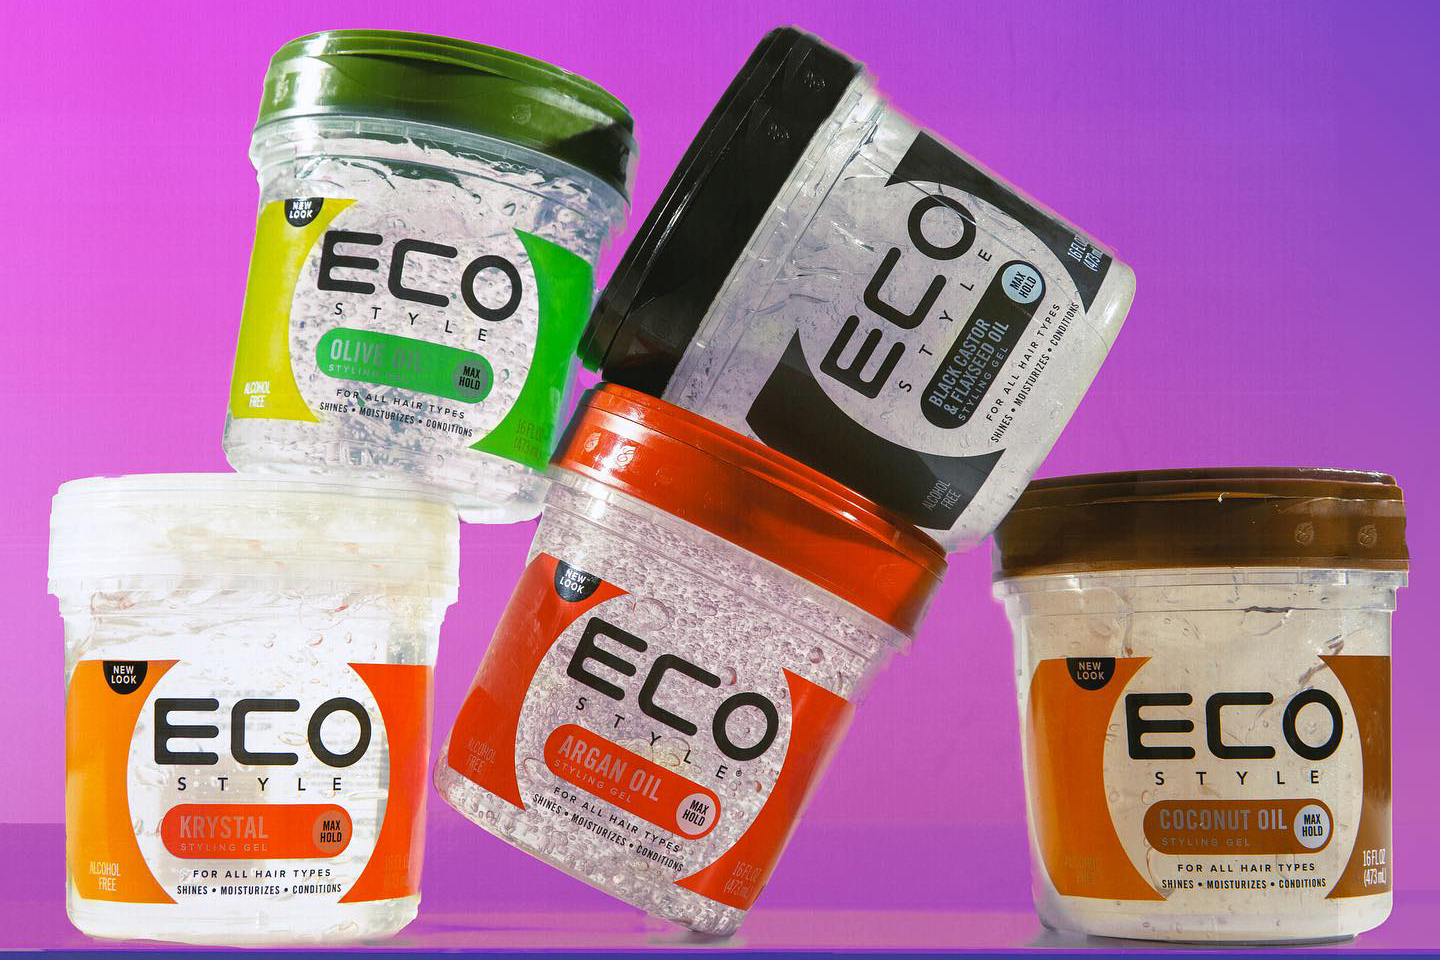 ECO Style 5 gel products displayed